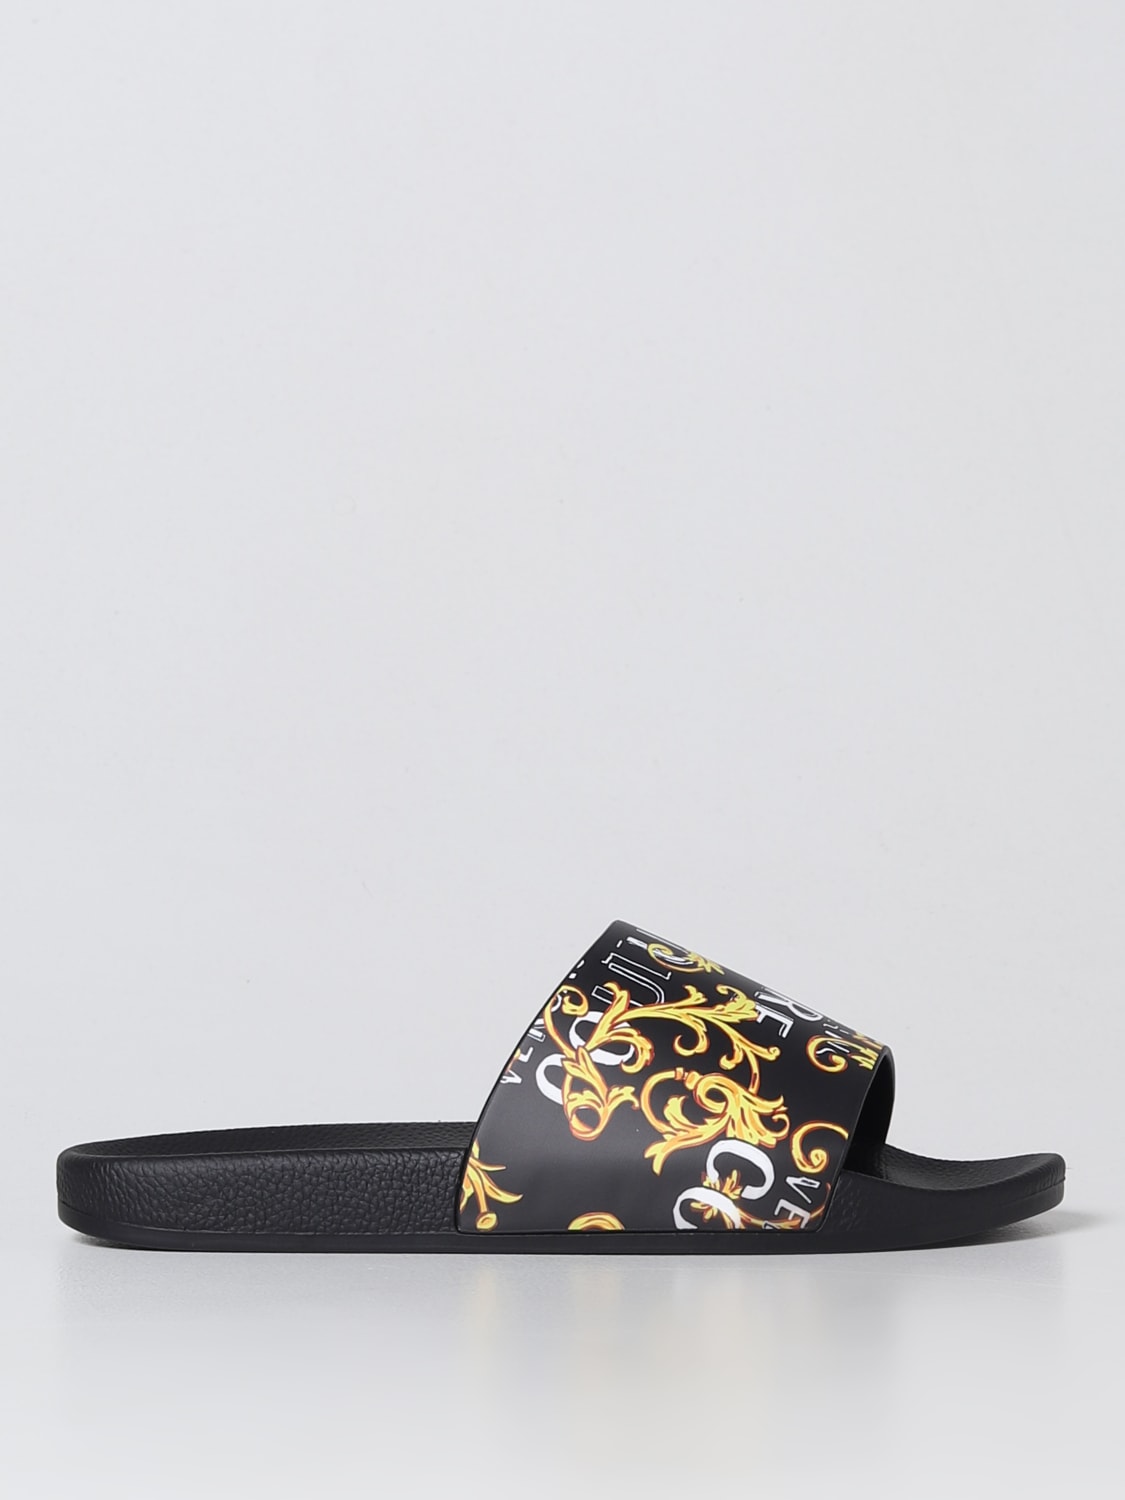 VERSACE JEANS COUTURE サンダル 26.0cm